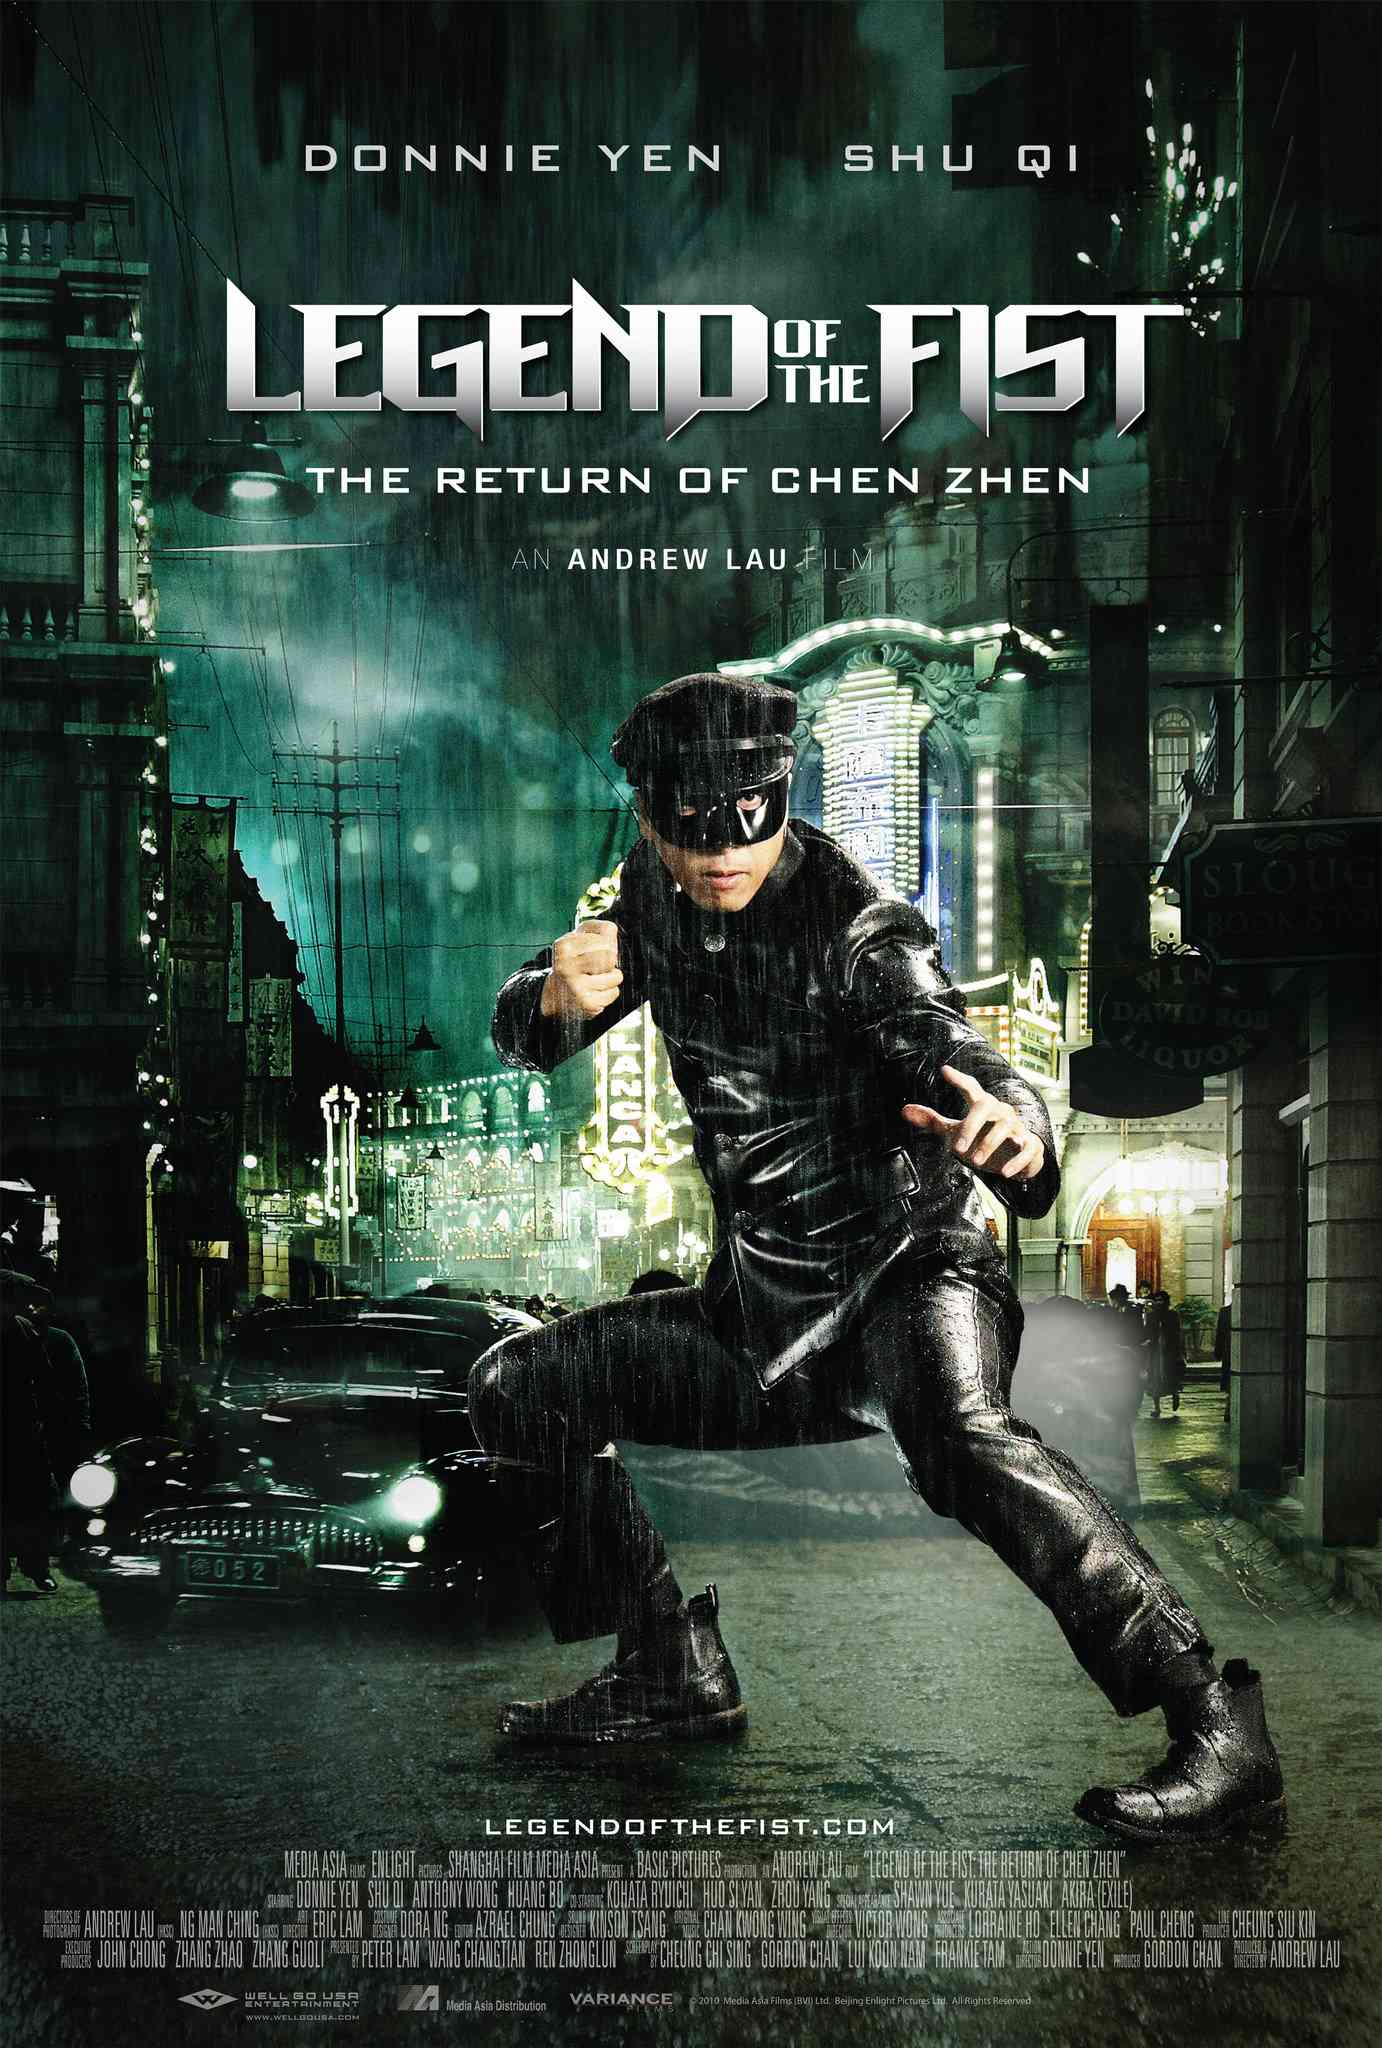 FULL MOVIE: Legend of the Fist: The Return of Chen Zhen (2010) [Action]